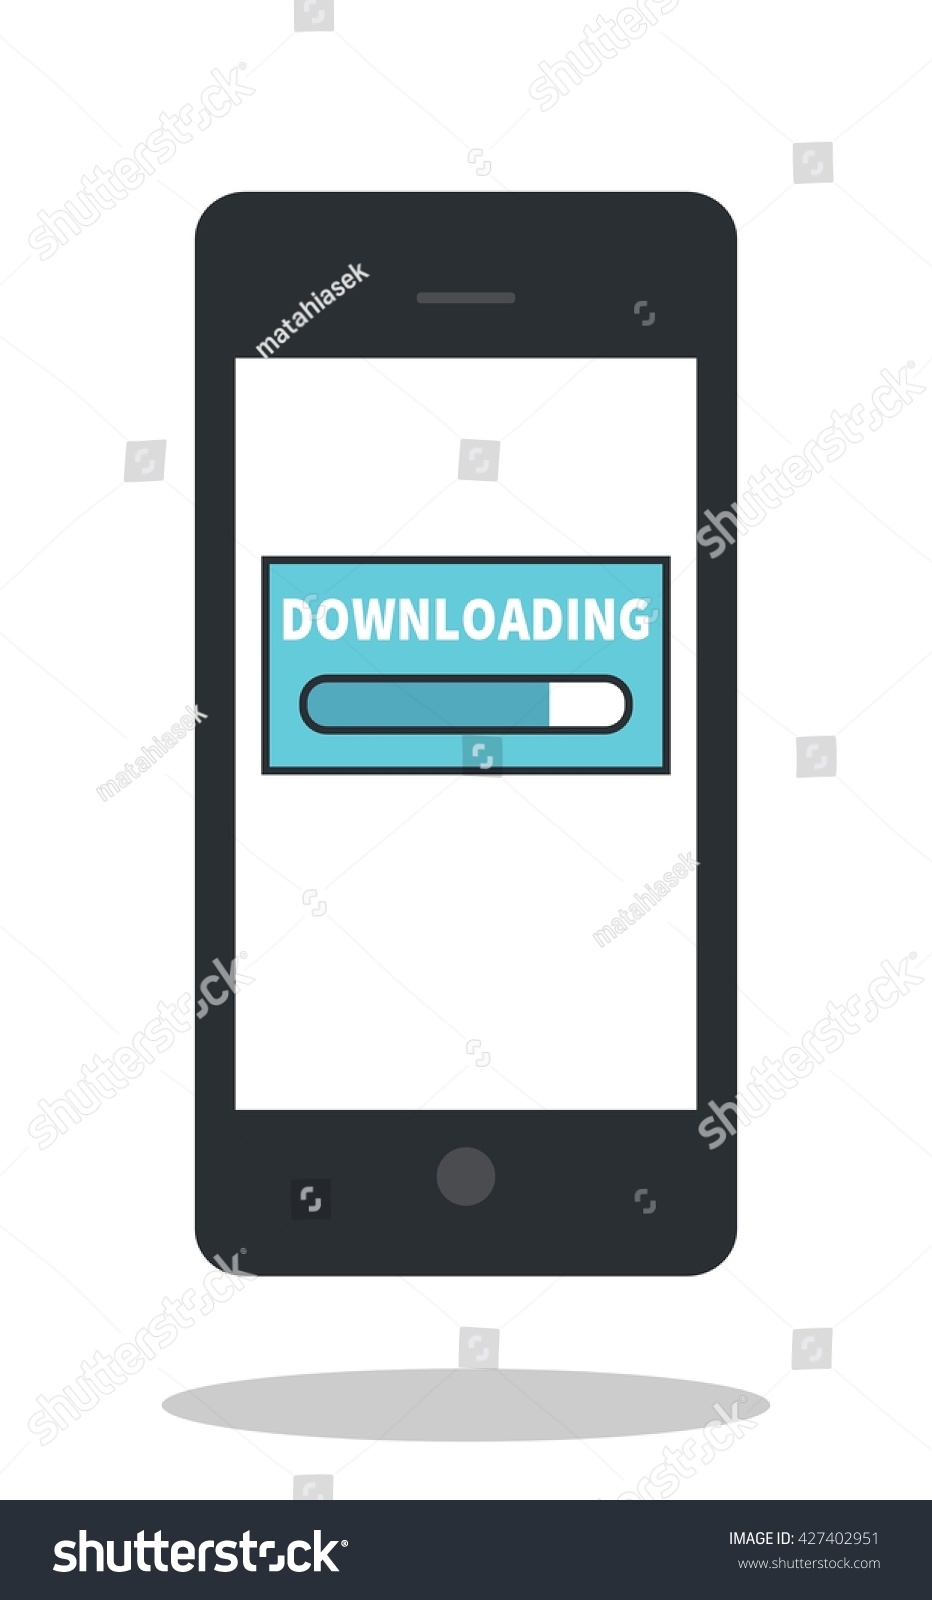 Mobile phone icon Cellphone with antenna sign Vector Image